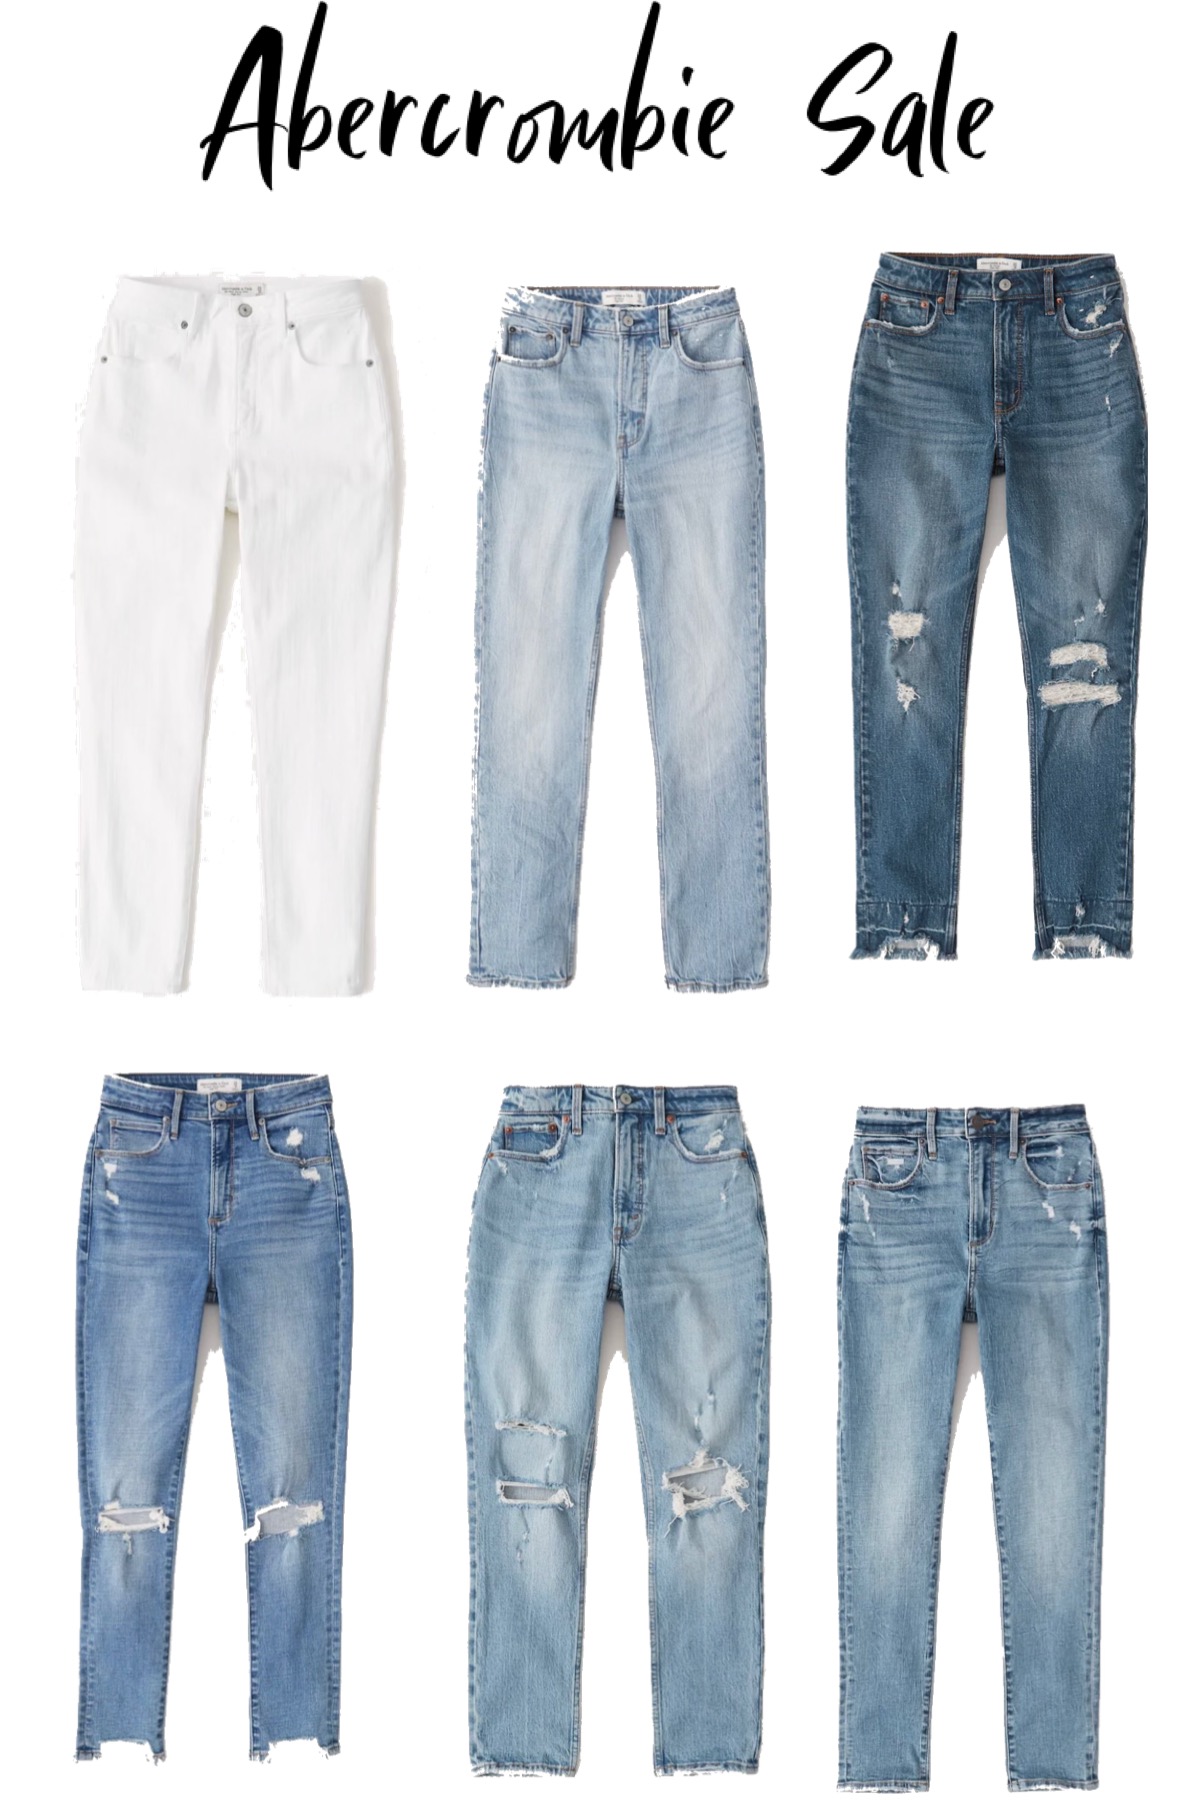 Womens Abercrombie Jeans - Daily Dose of Style